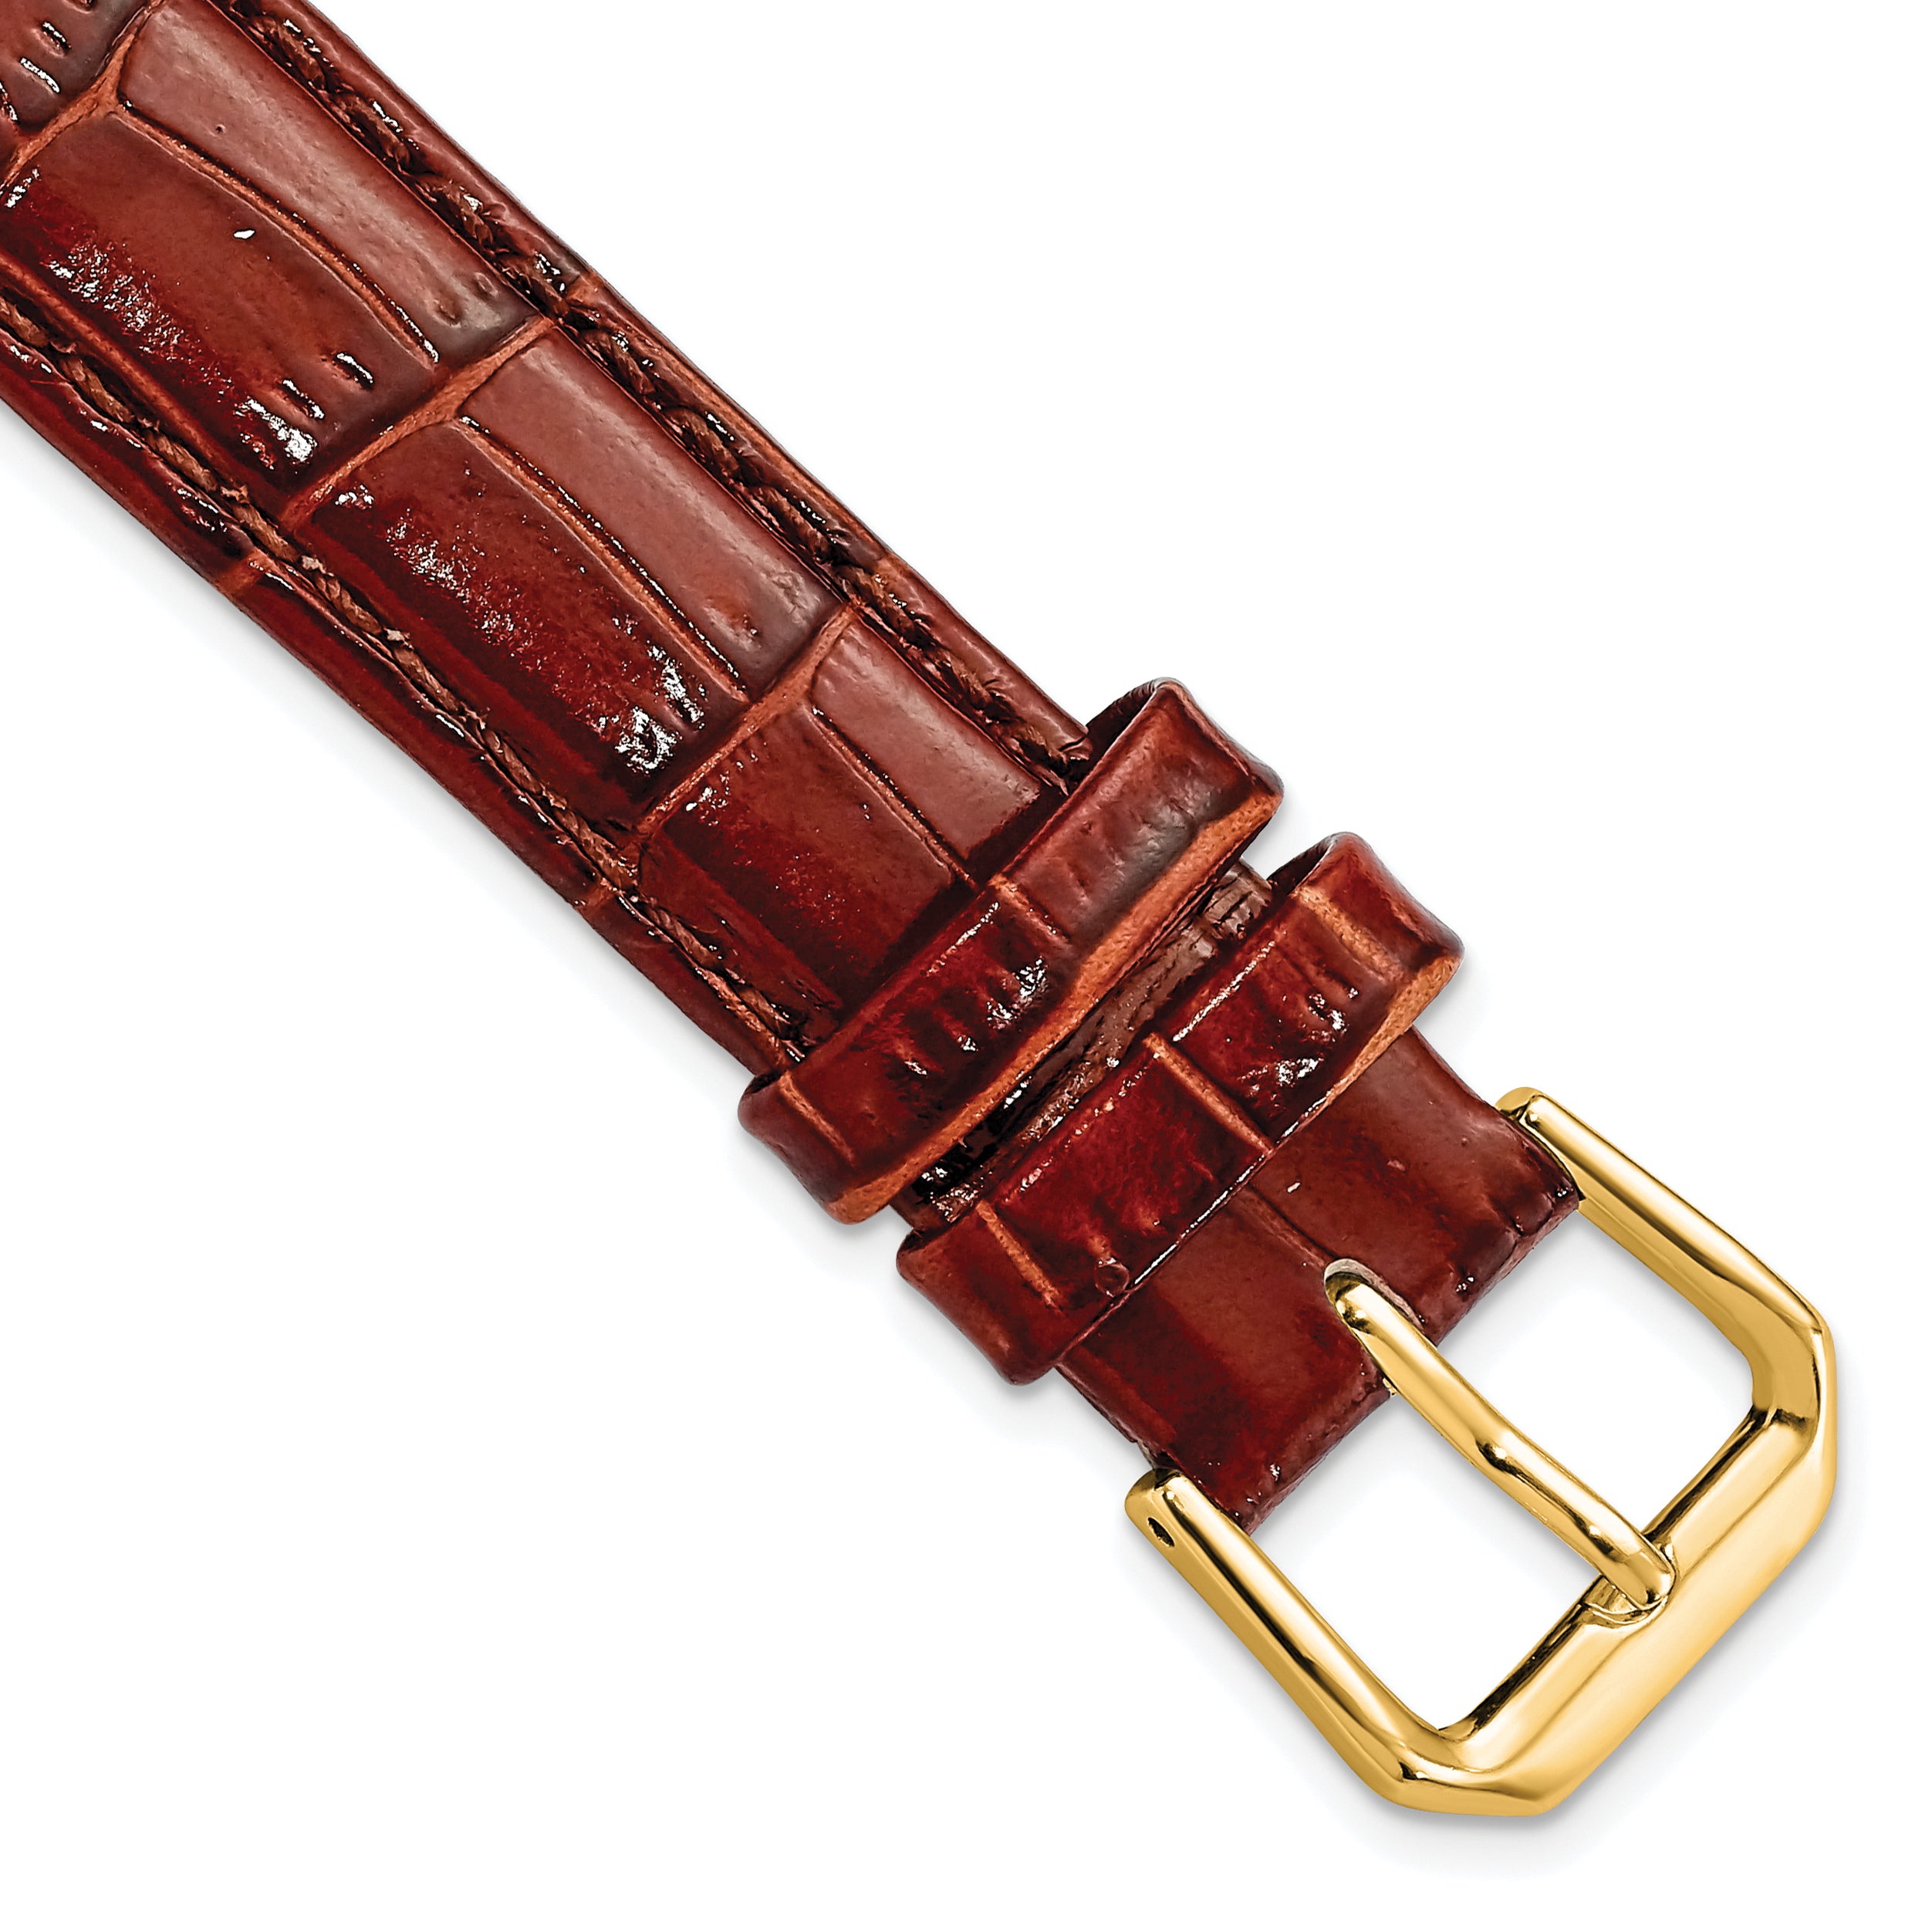 DeBeer 16mm Havana Crocodile Grain Leather with Dark Stitching and Gold-tone Buckle 7.5 inch Watch Band